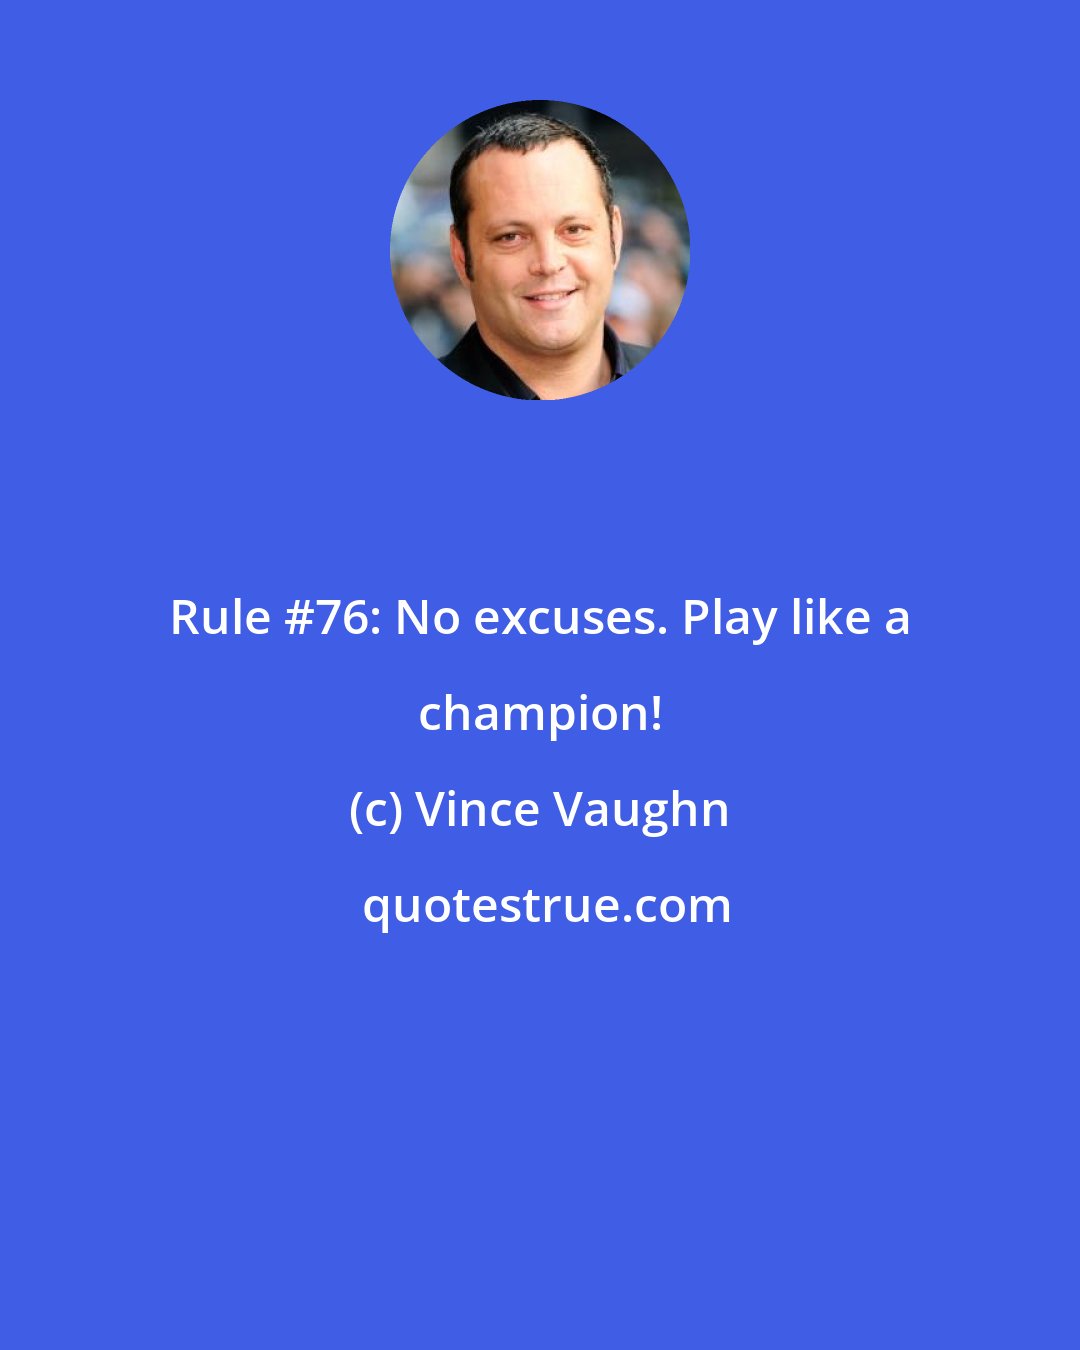 Vince Vaughn: Rule #76: No excuses. Play like a champion!